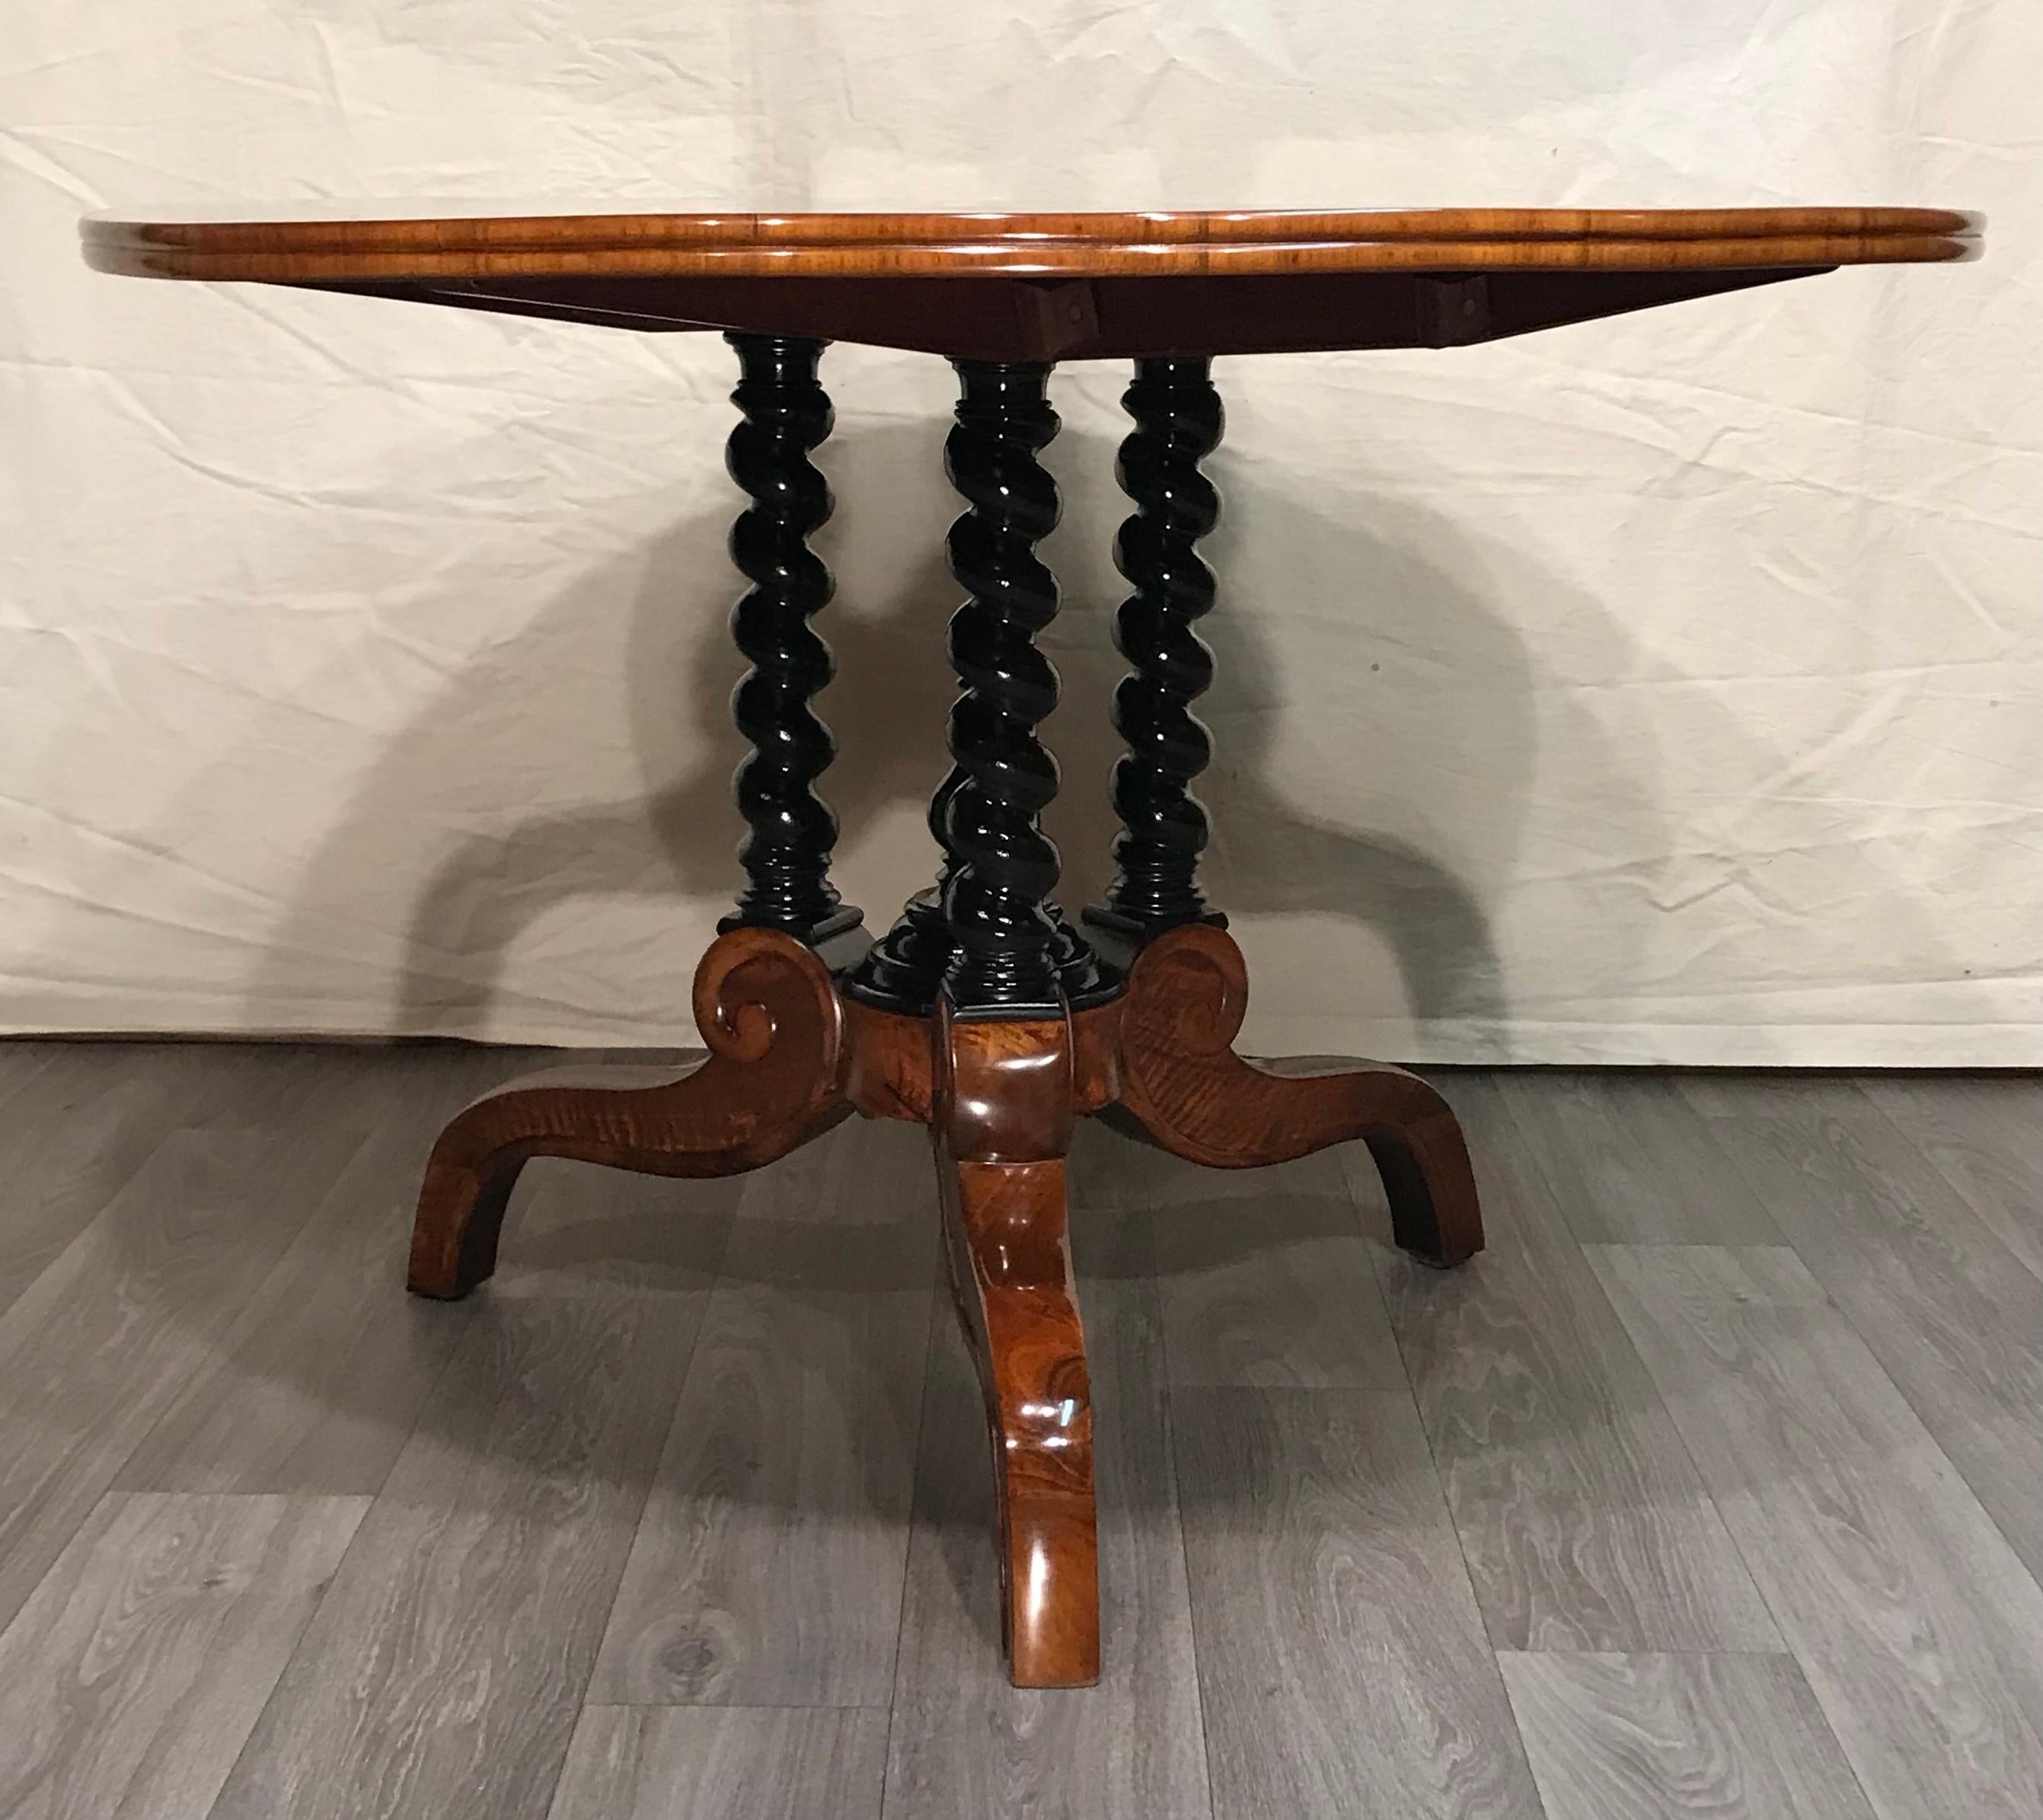 This gorgeous Louis Philippe table dates back to around 1840-50. It stands out for its beautiful walnut root veneer on the top. The base consists of three twisted ebonized columns which stand on a tripod base. The legs of the tripod base are